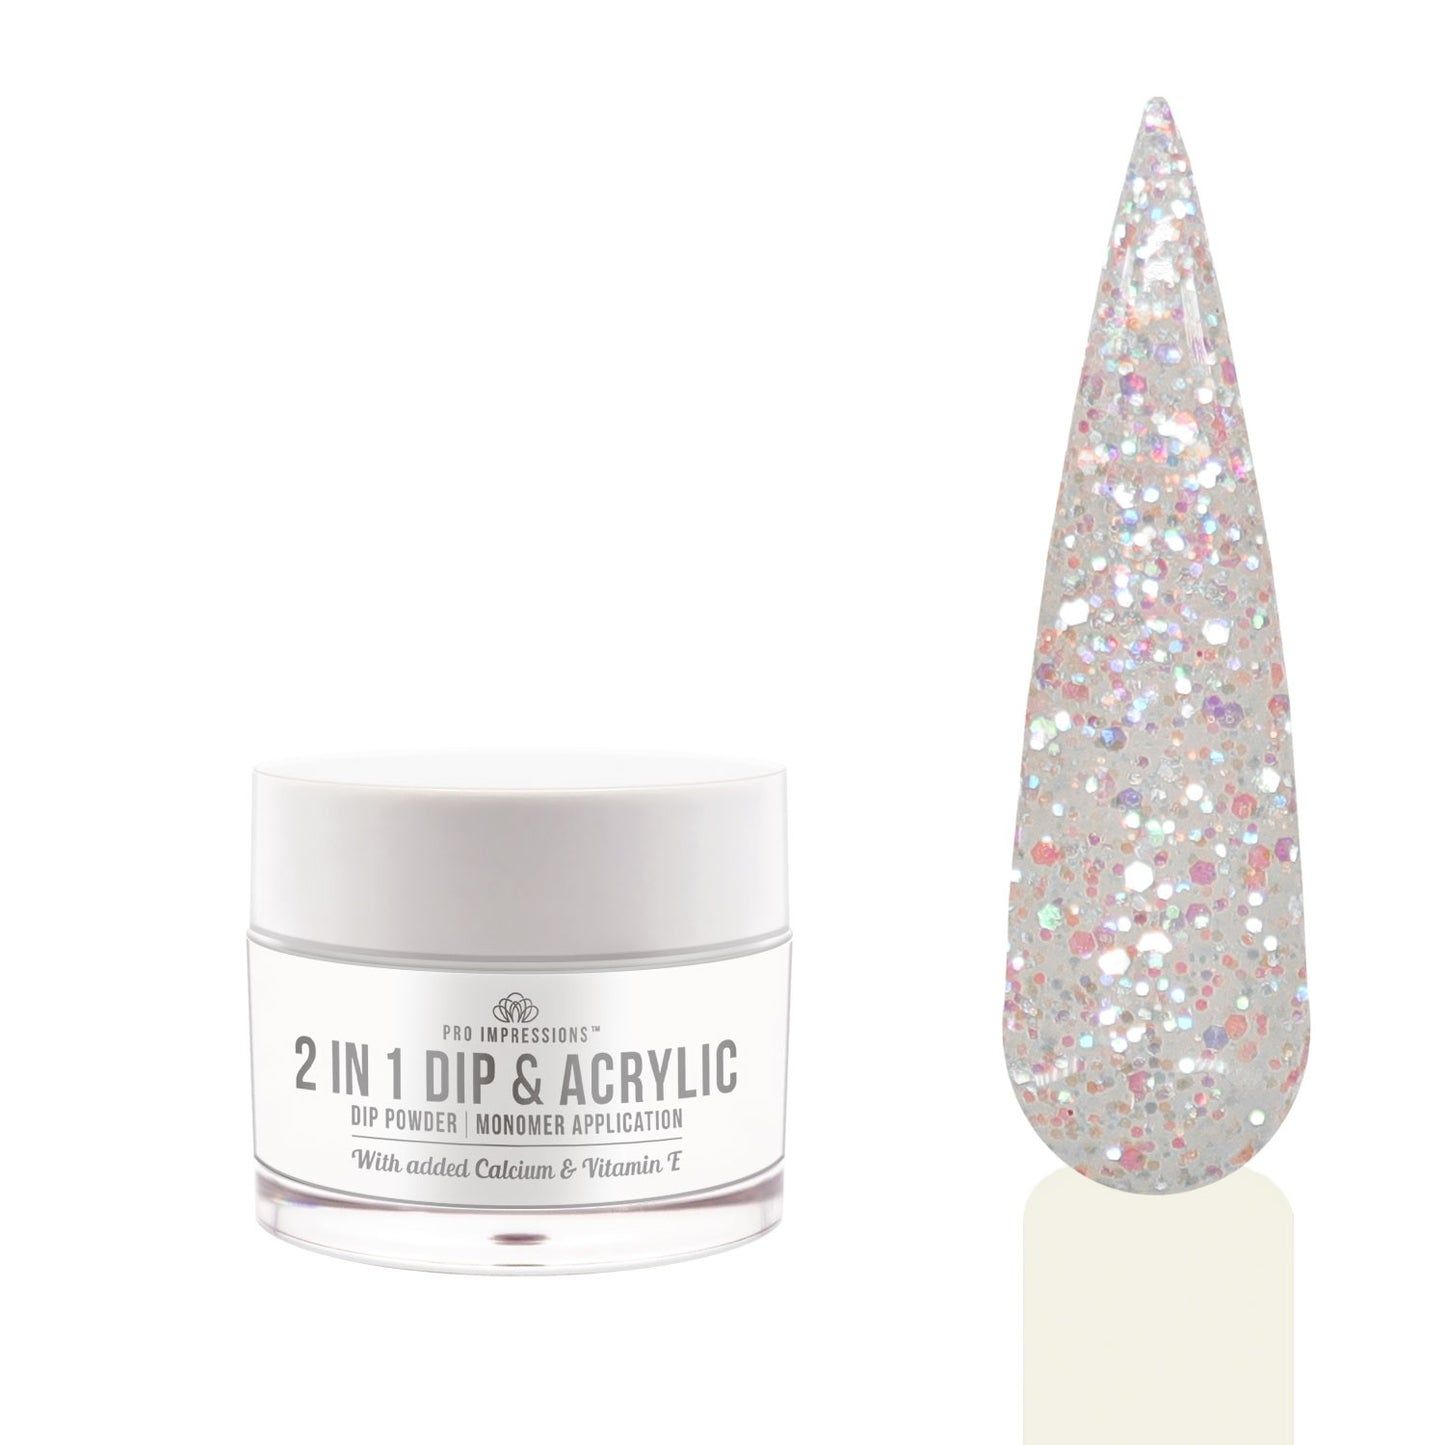 2 In 1 Dip & Acrylic Powder - No.8 Holographic Glitter - 30g